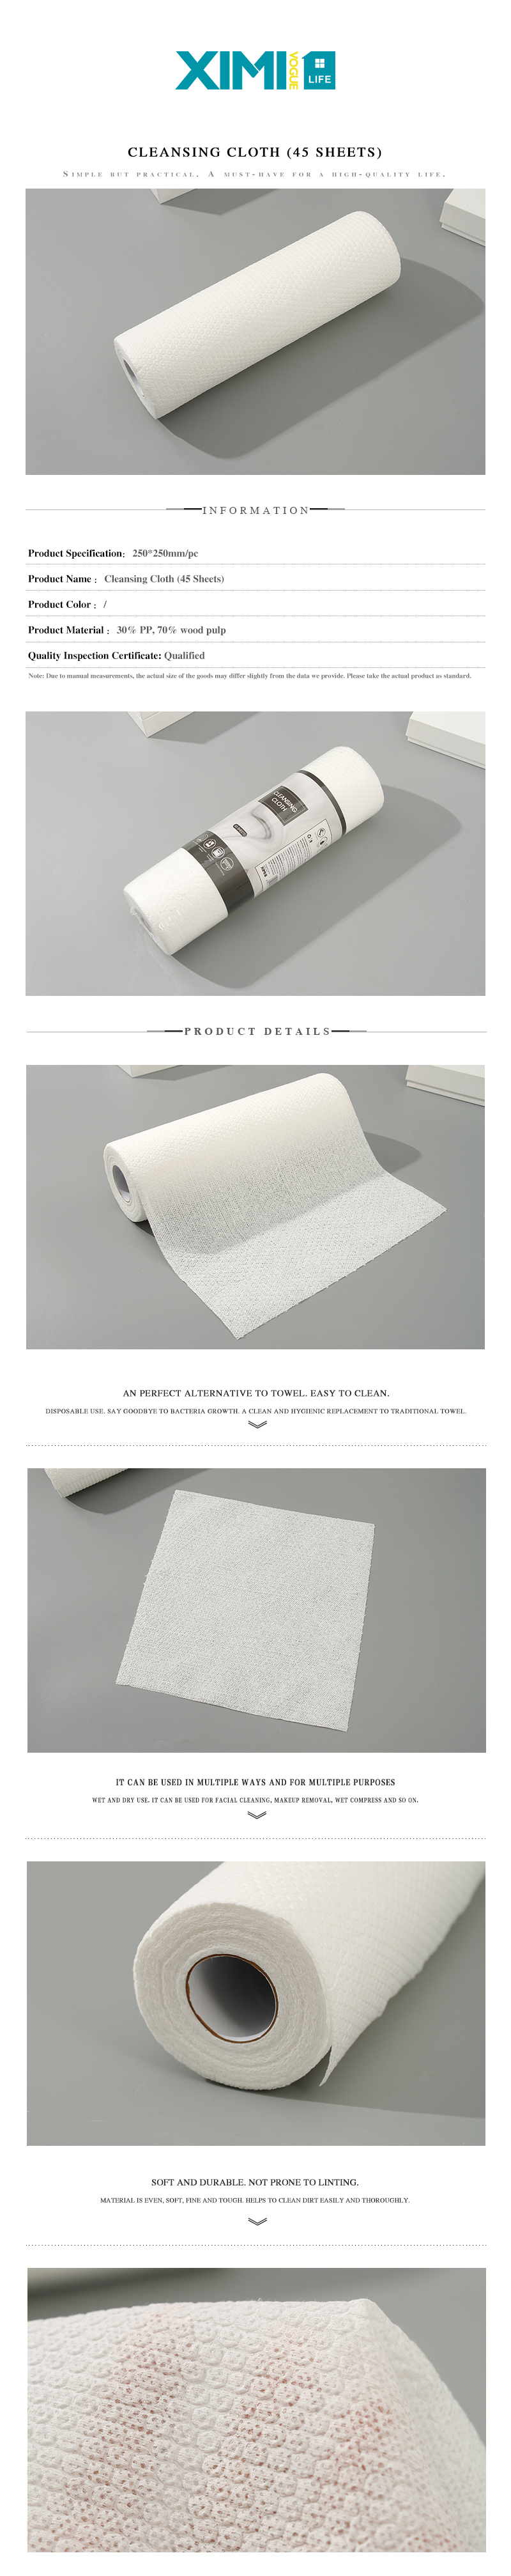 Cleansing Cloth (45 Sheets)